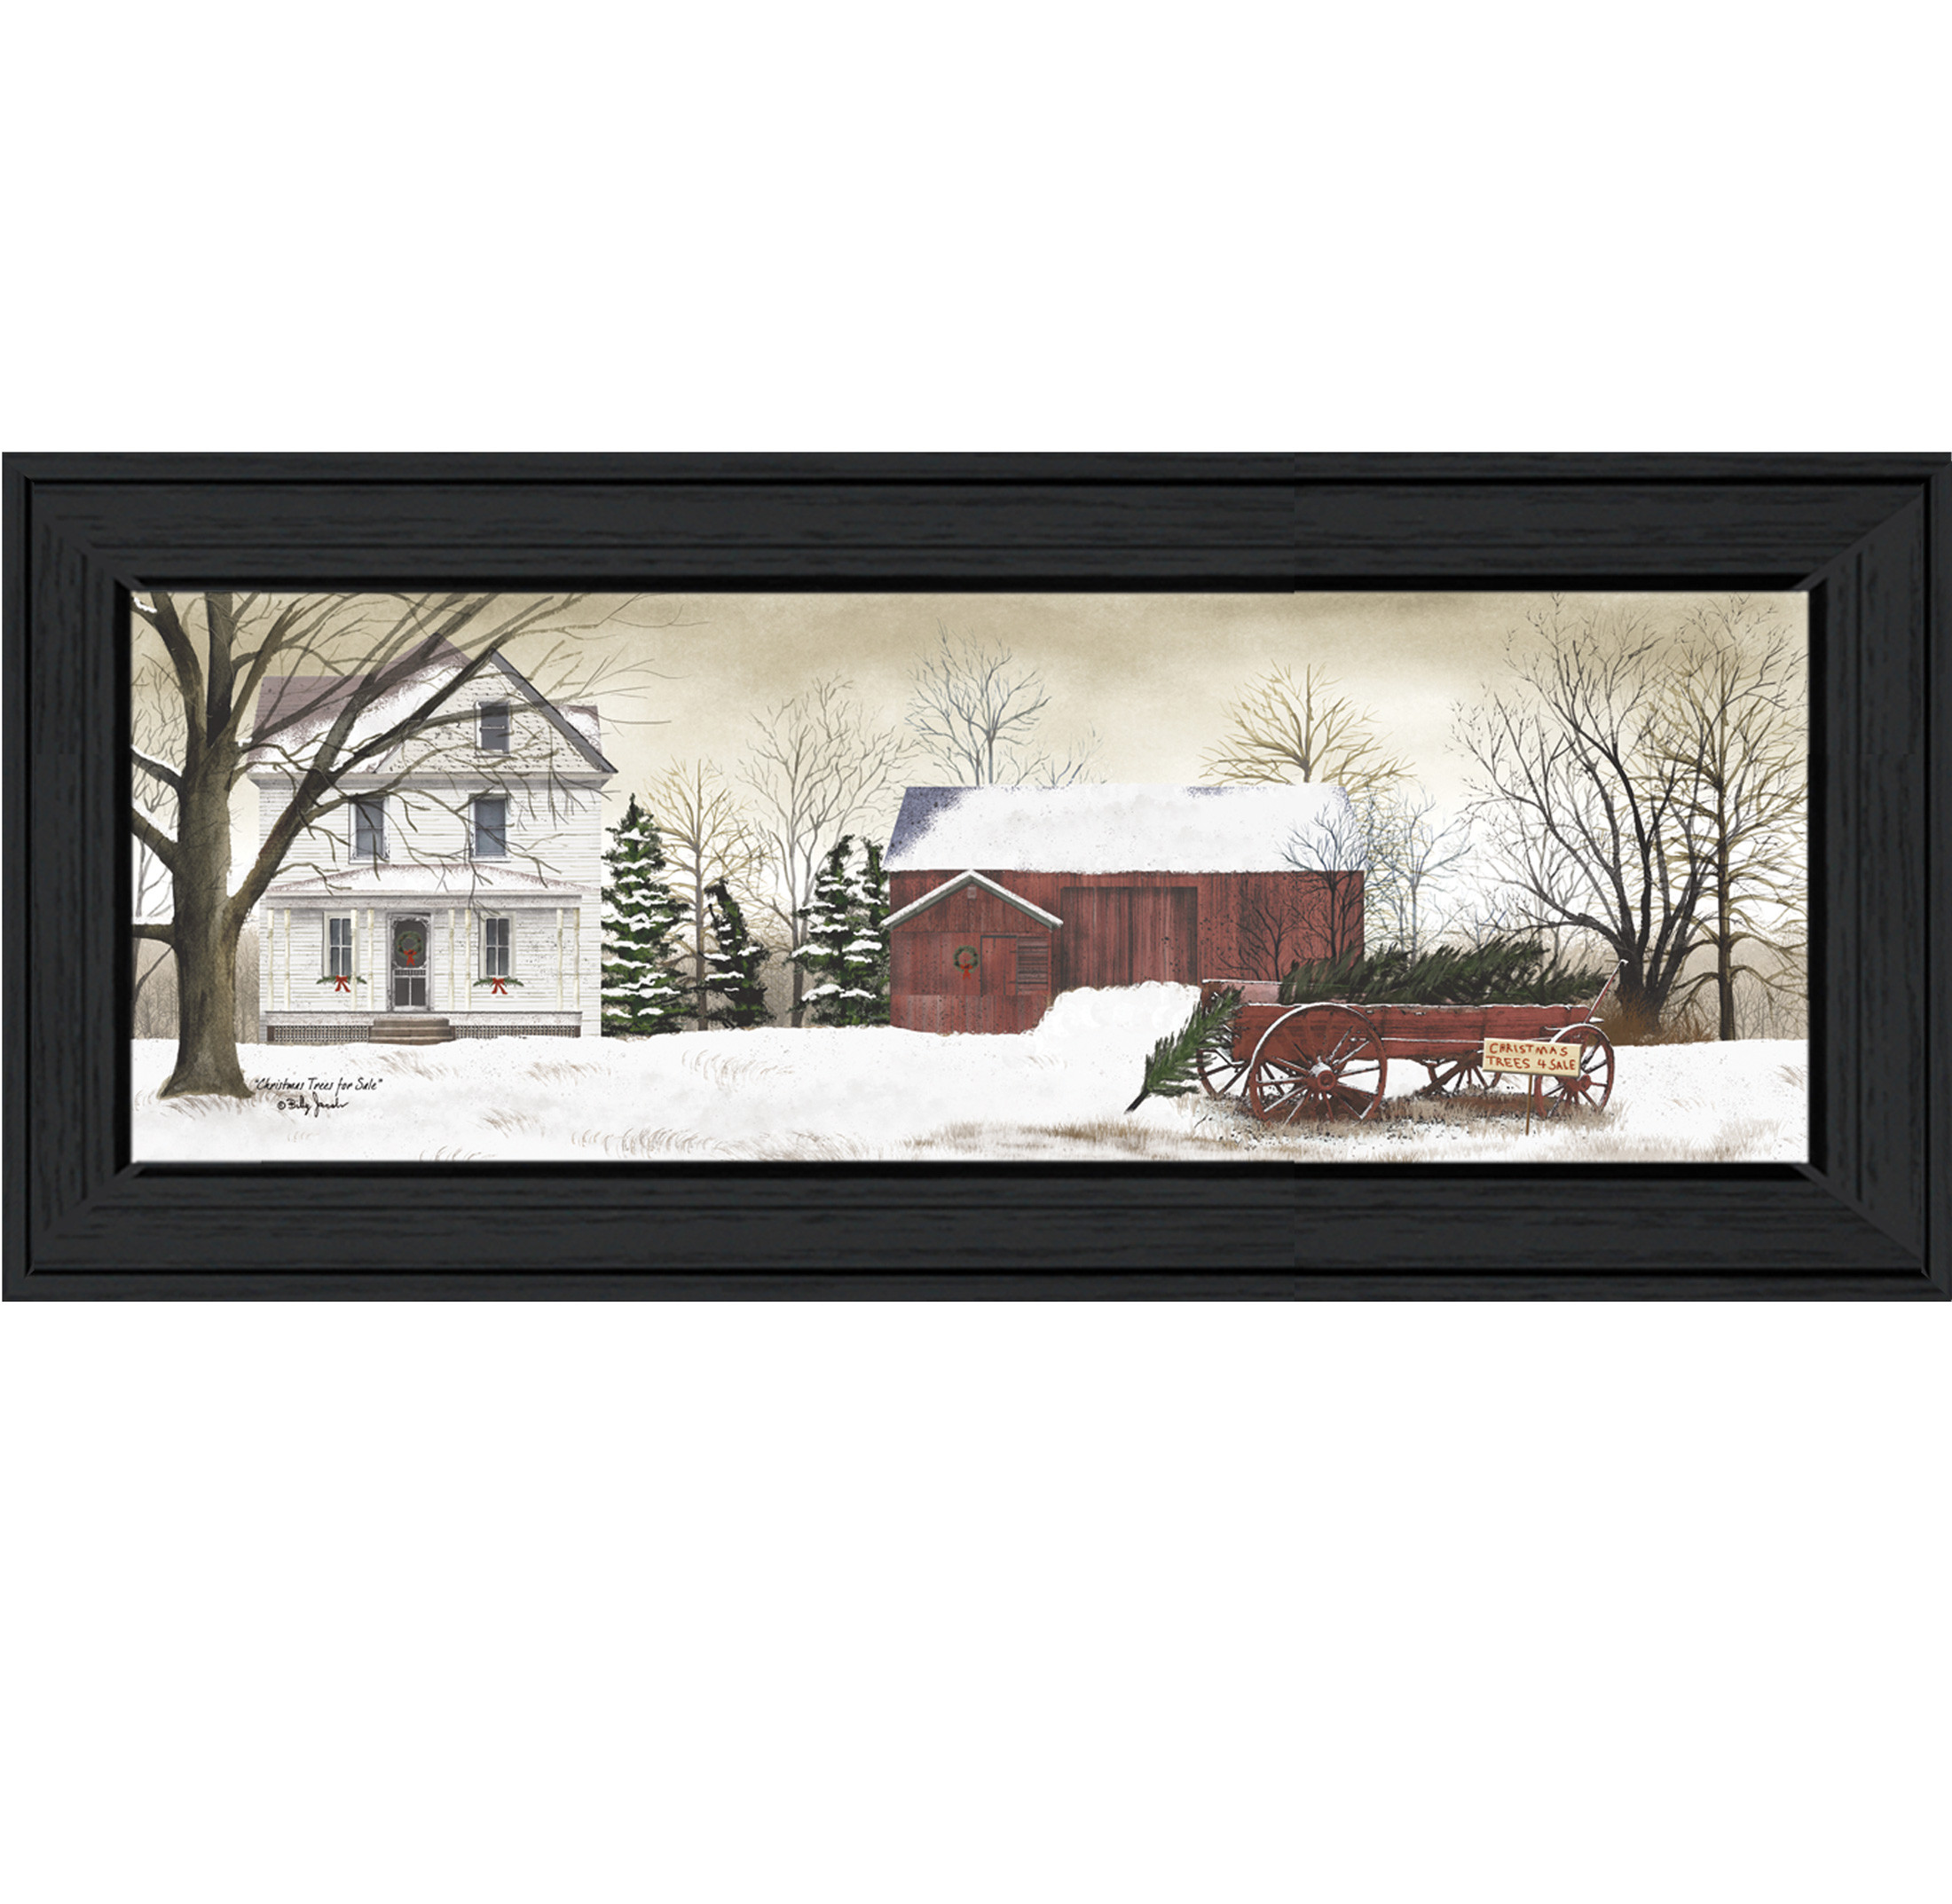 Christmas Framed Wall Art
 "Christmas Trees for Sale" by Billy Jacobs Printed Framed